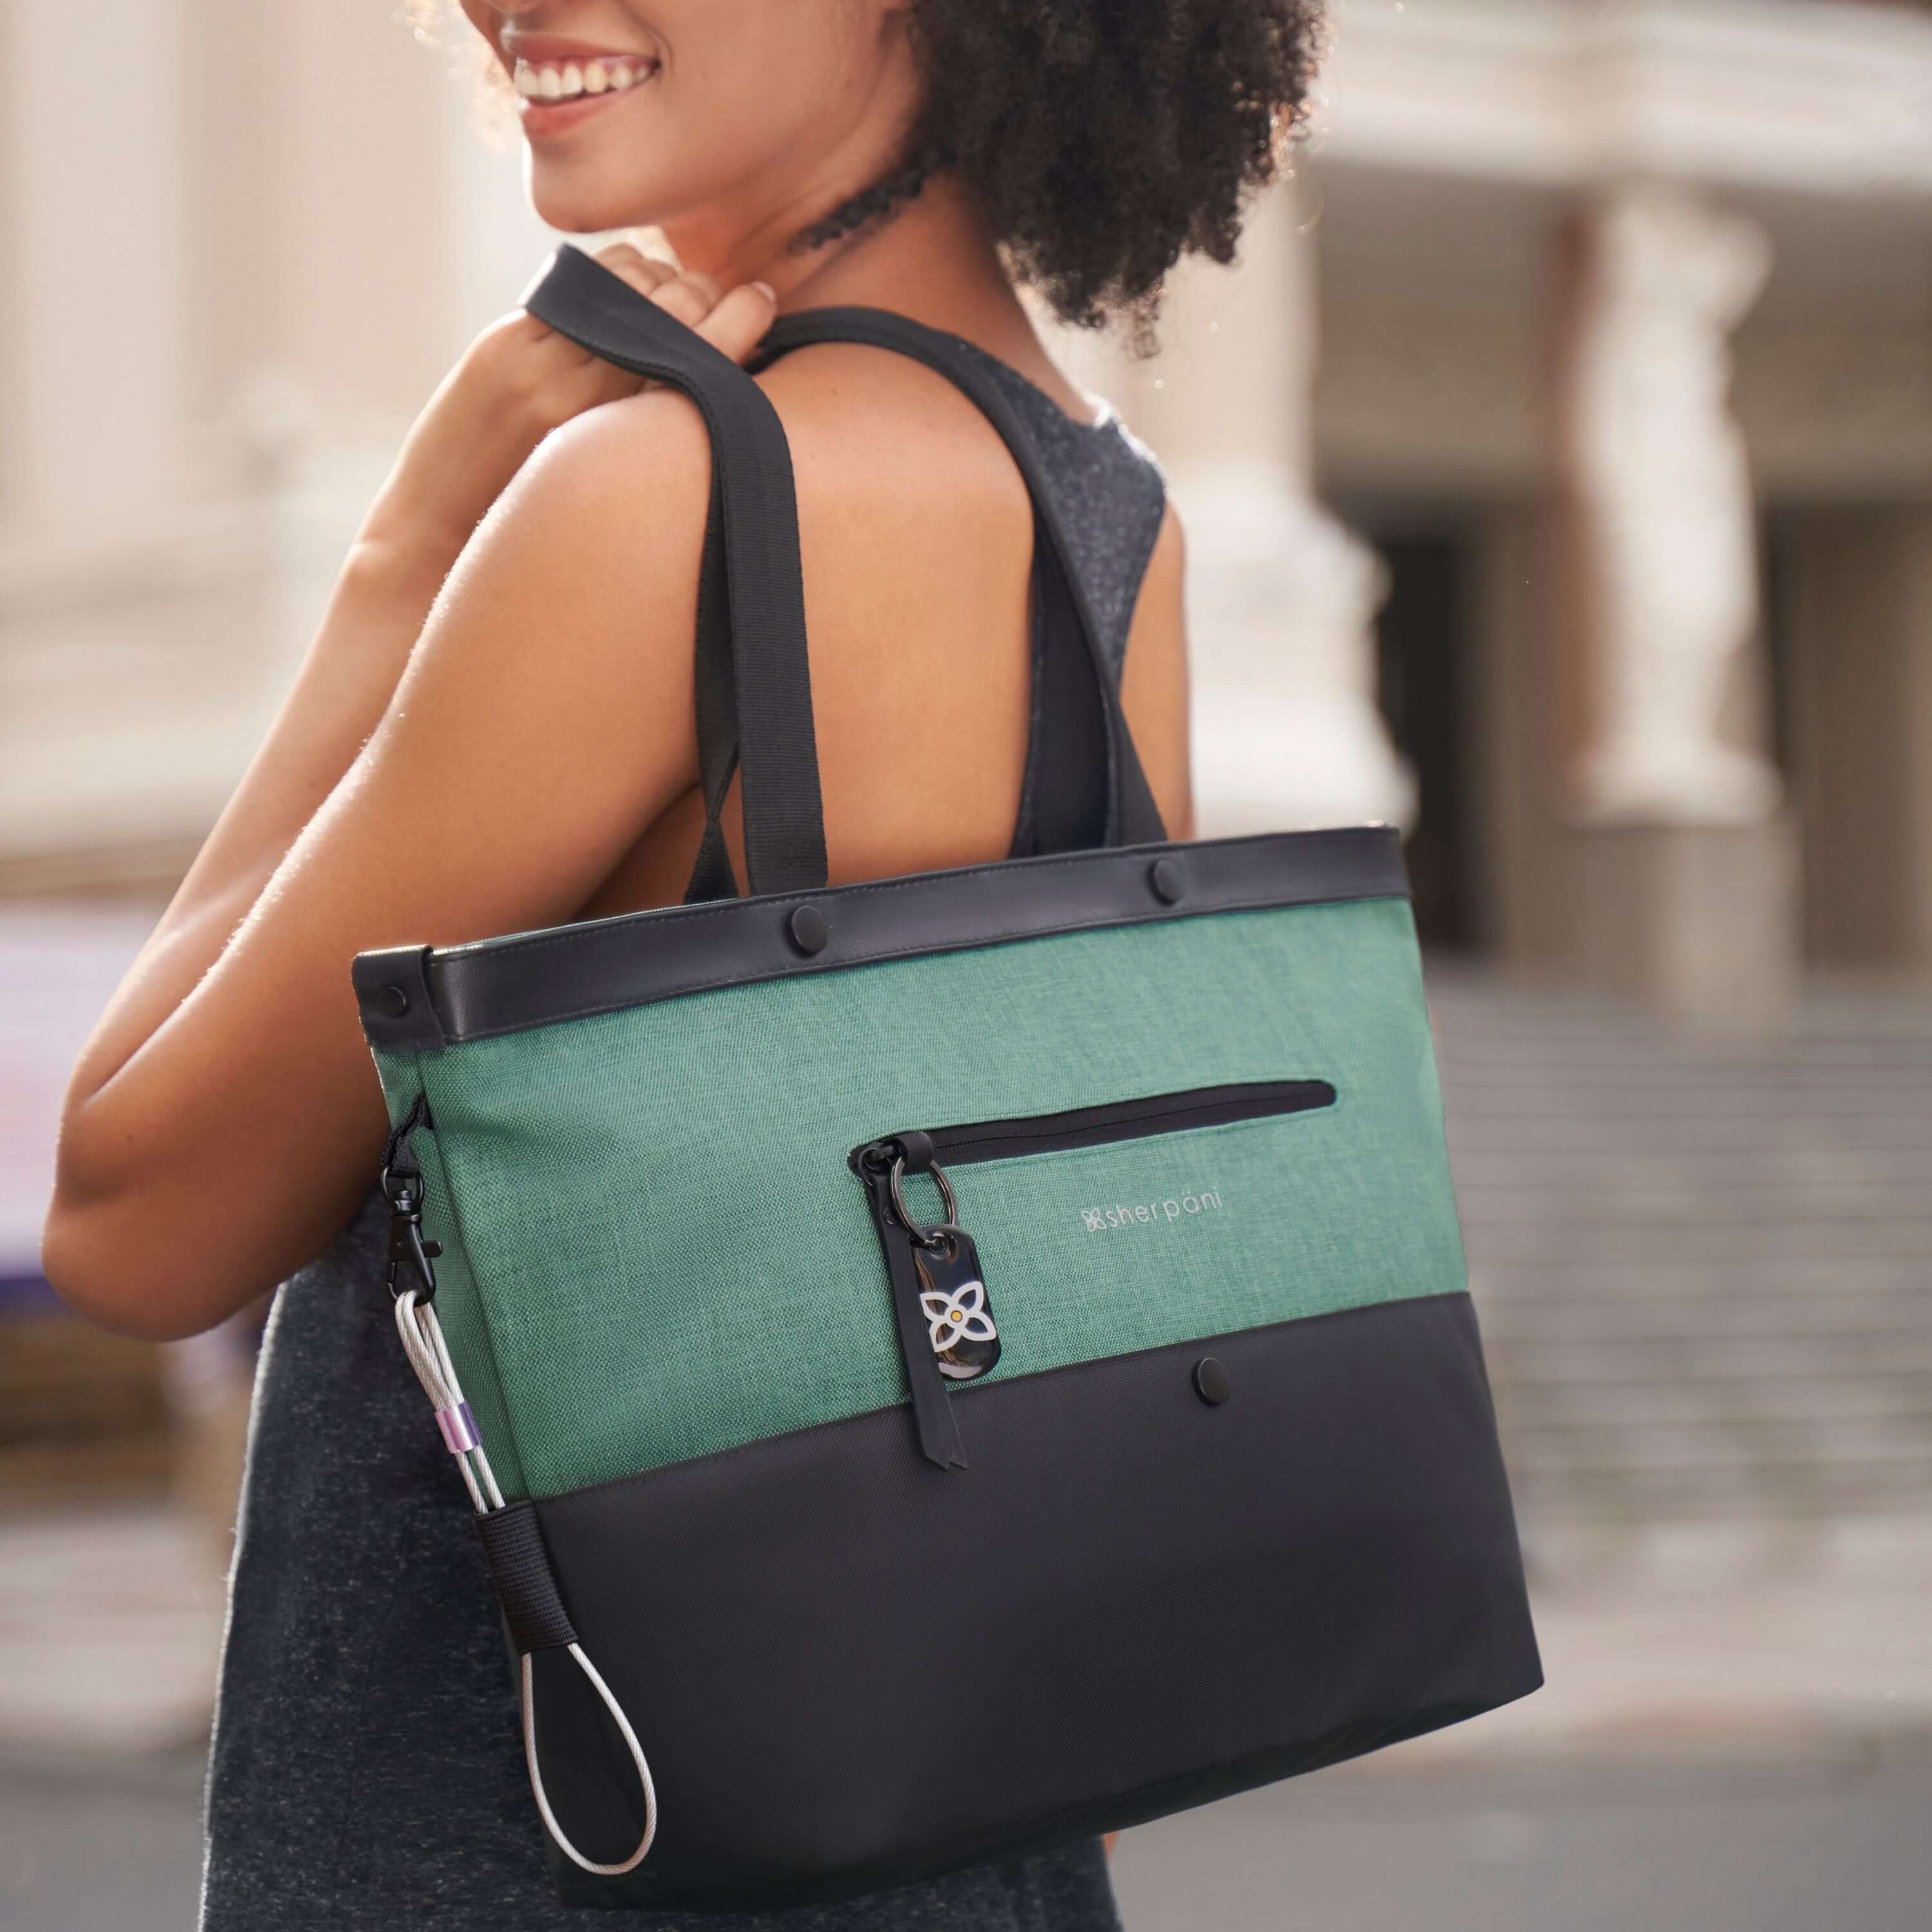 A curly haired model is facing away from the camera, looking over her left shoulder and smiling. She is wearing a gray tank top and black leggings. She is holding Sherpani&#39;s Anti-Theft Tote, the Cali AT in Teal, over her shoulder.